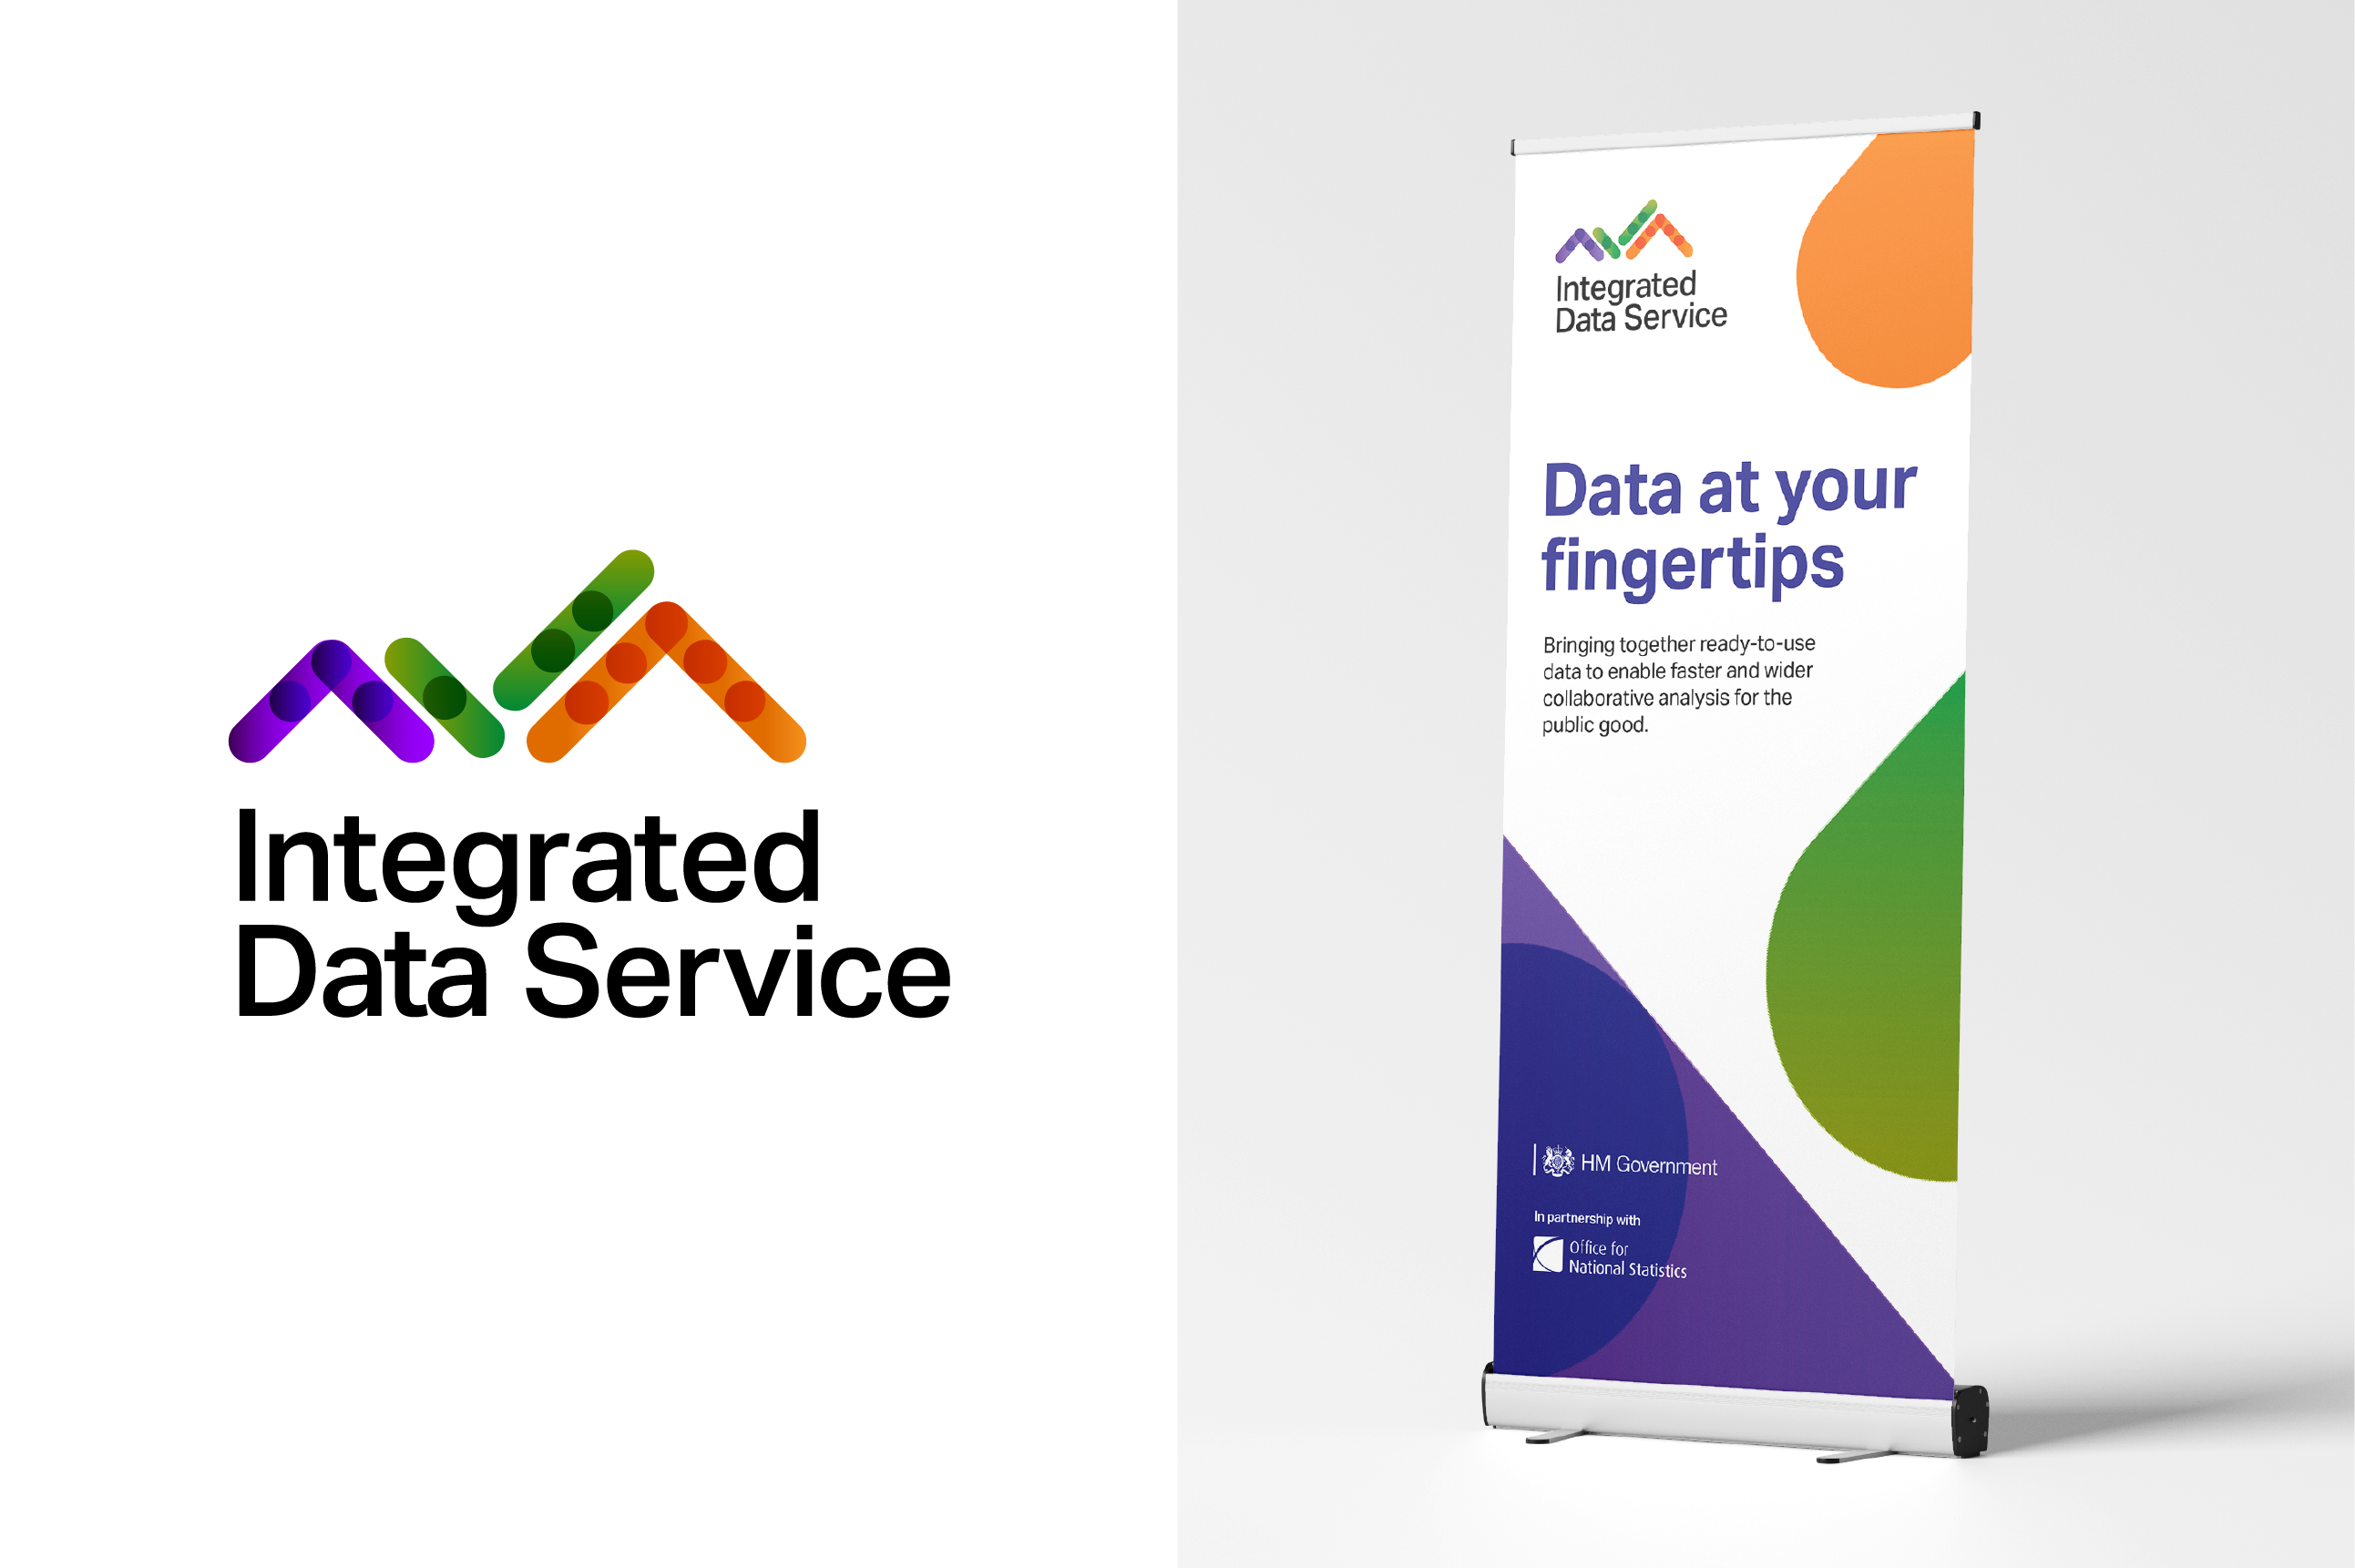 Integrated Data Service logo and example of logo in use on a pull up banner